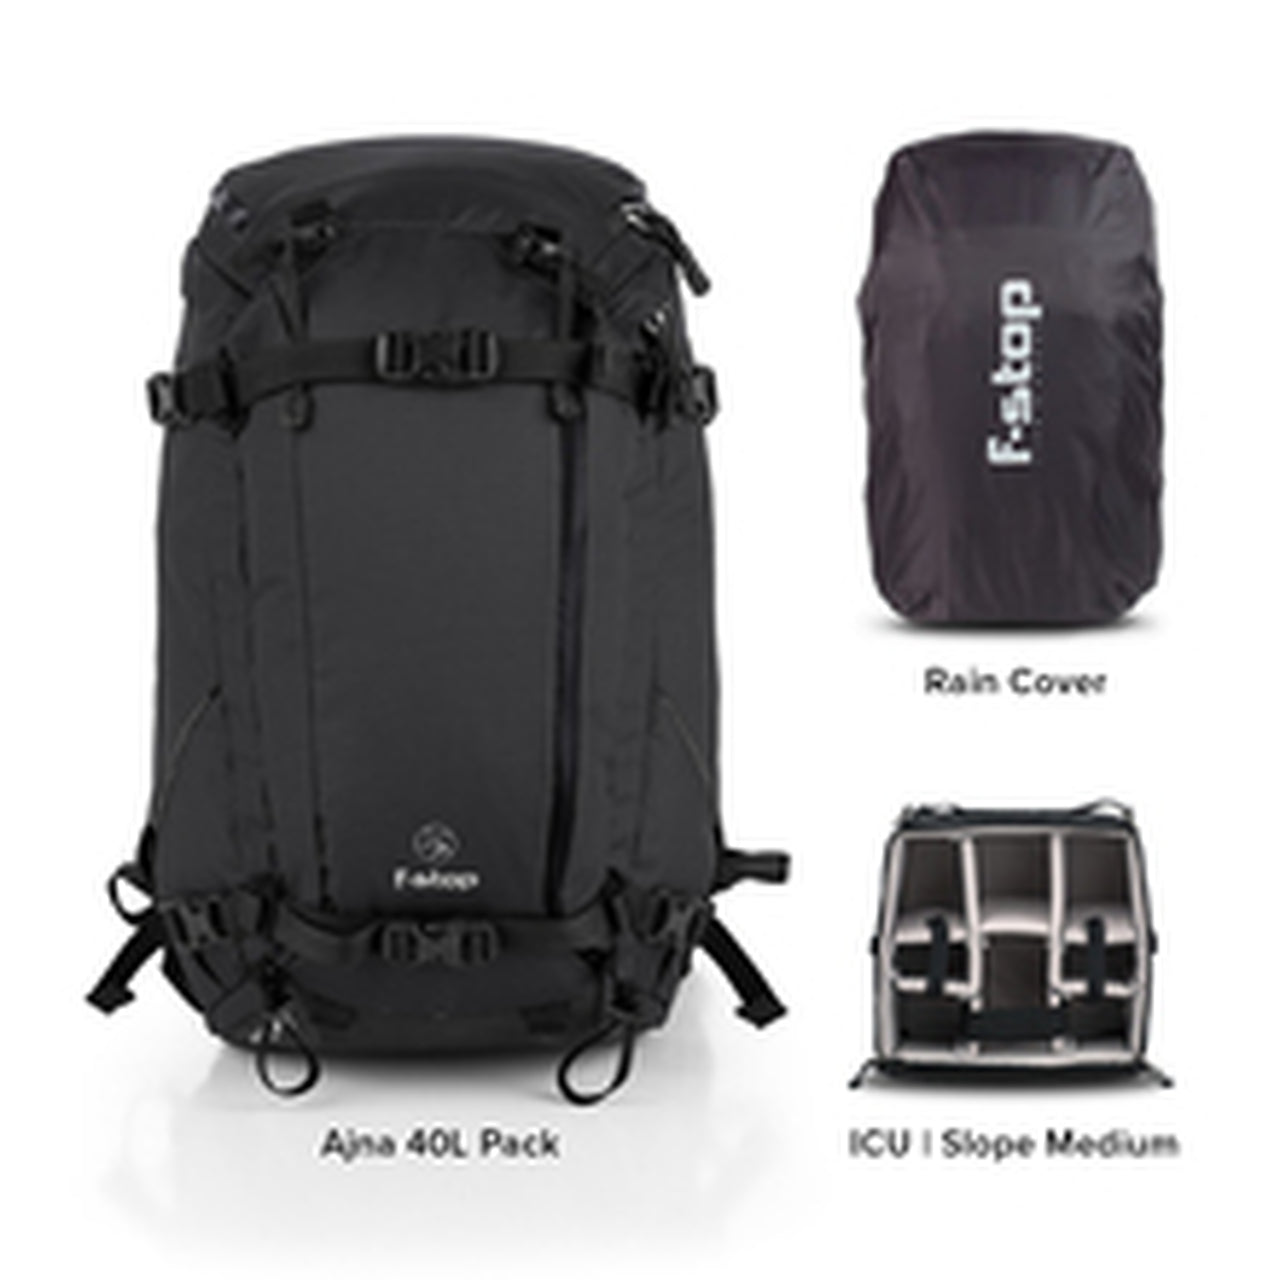 Ajna 40L Travel and Adventure Camera Backpack